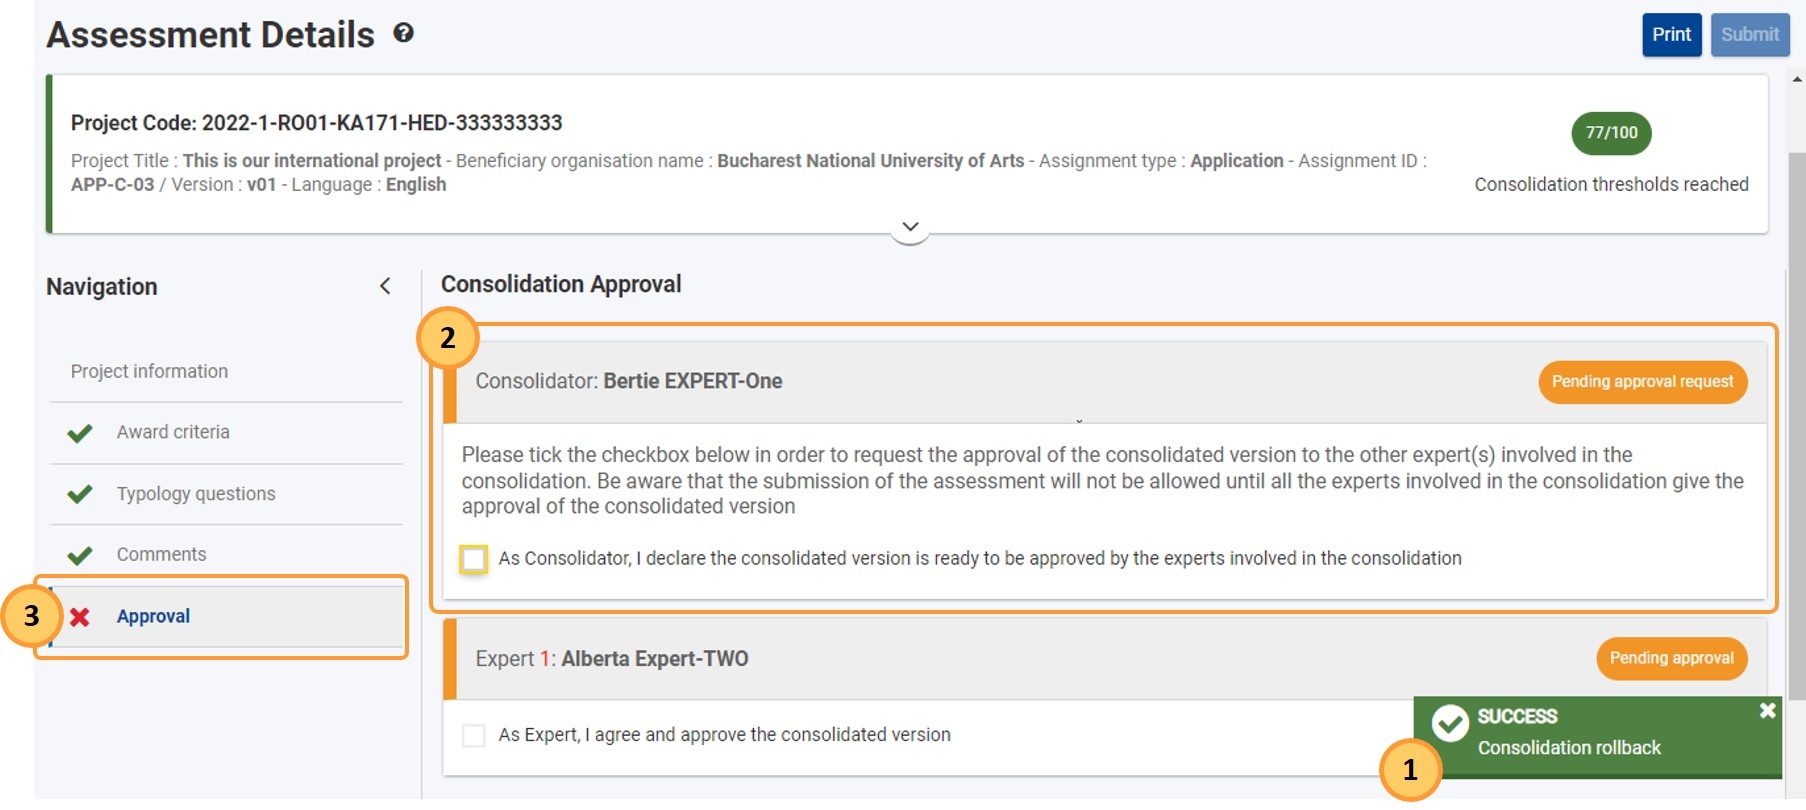 Expert approval request rolled back